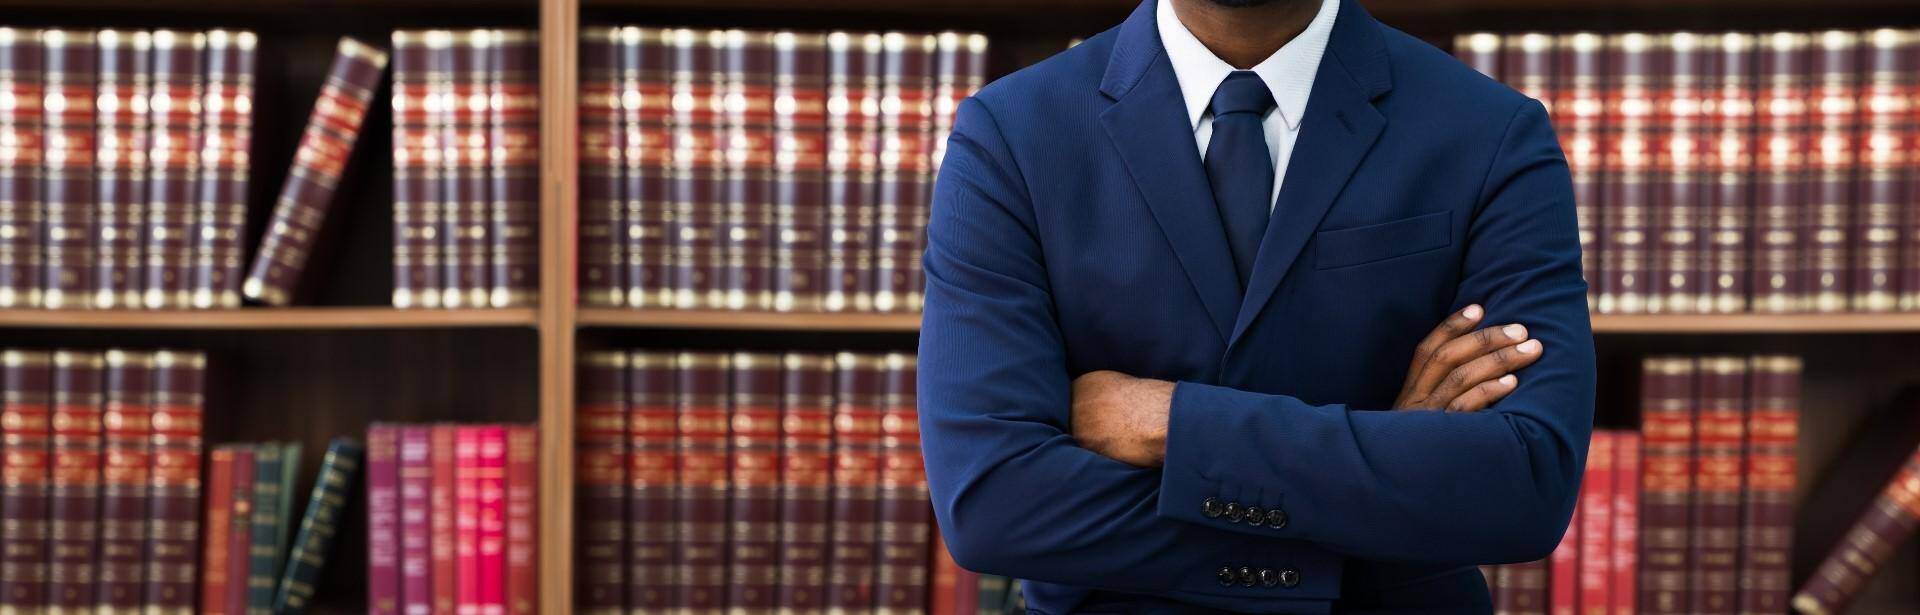 A black lawyer standing in front of a bookshelf of law book in Alpharetta, Georgia